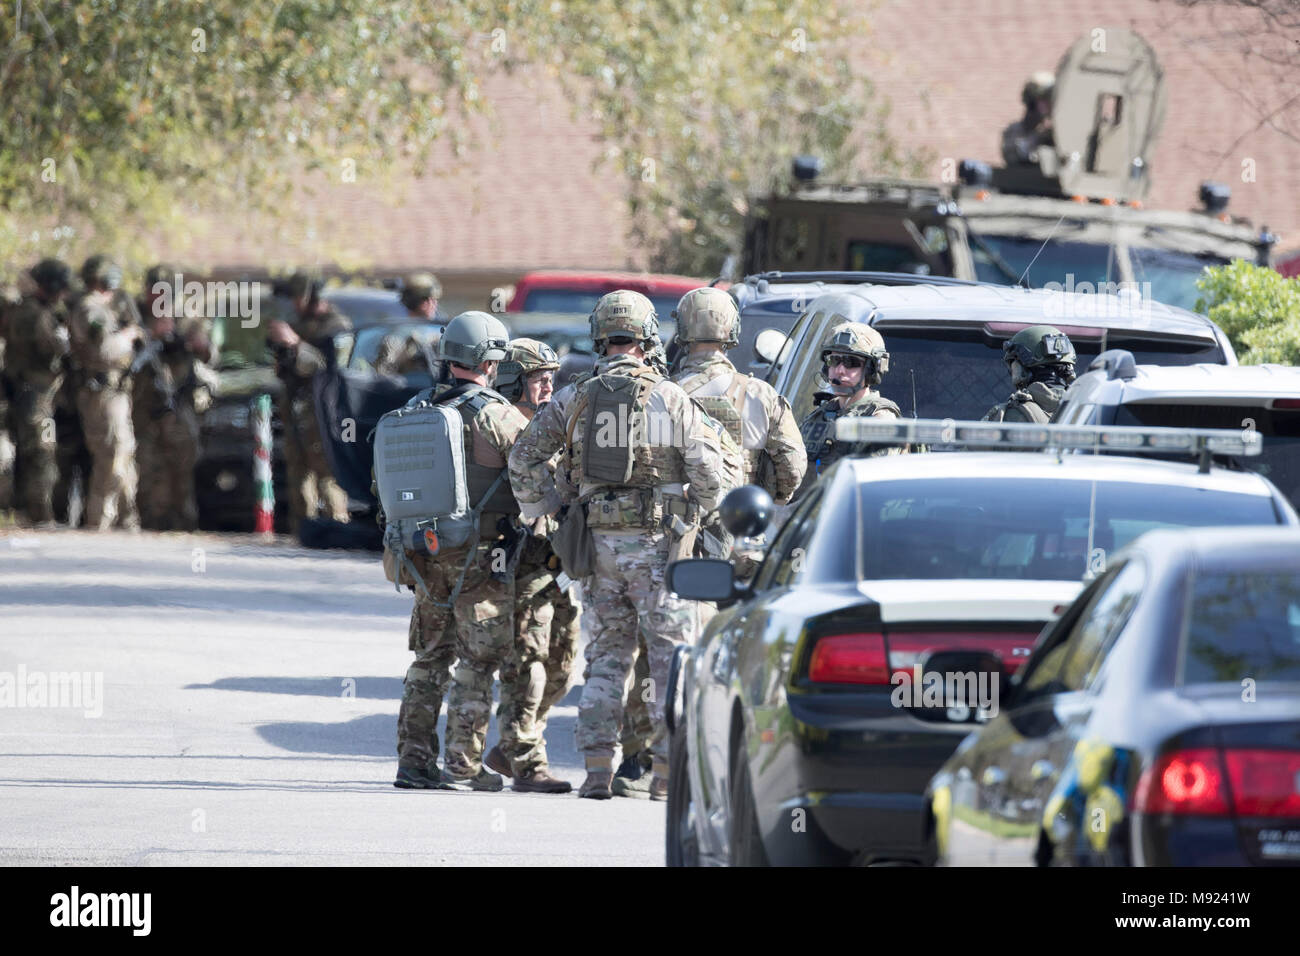 Police SWAT teams secure the Pflugerville, TX, neighborhood around the home of Mark Conditt, who was the suspected serial bomber terrorizing Austin for three weeks. Conditt killed himself earlier in the day during a car chase as officers closed in. Stock Photo